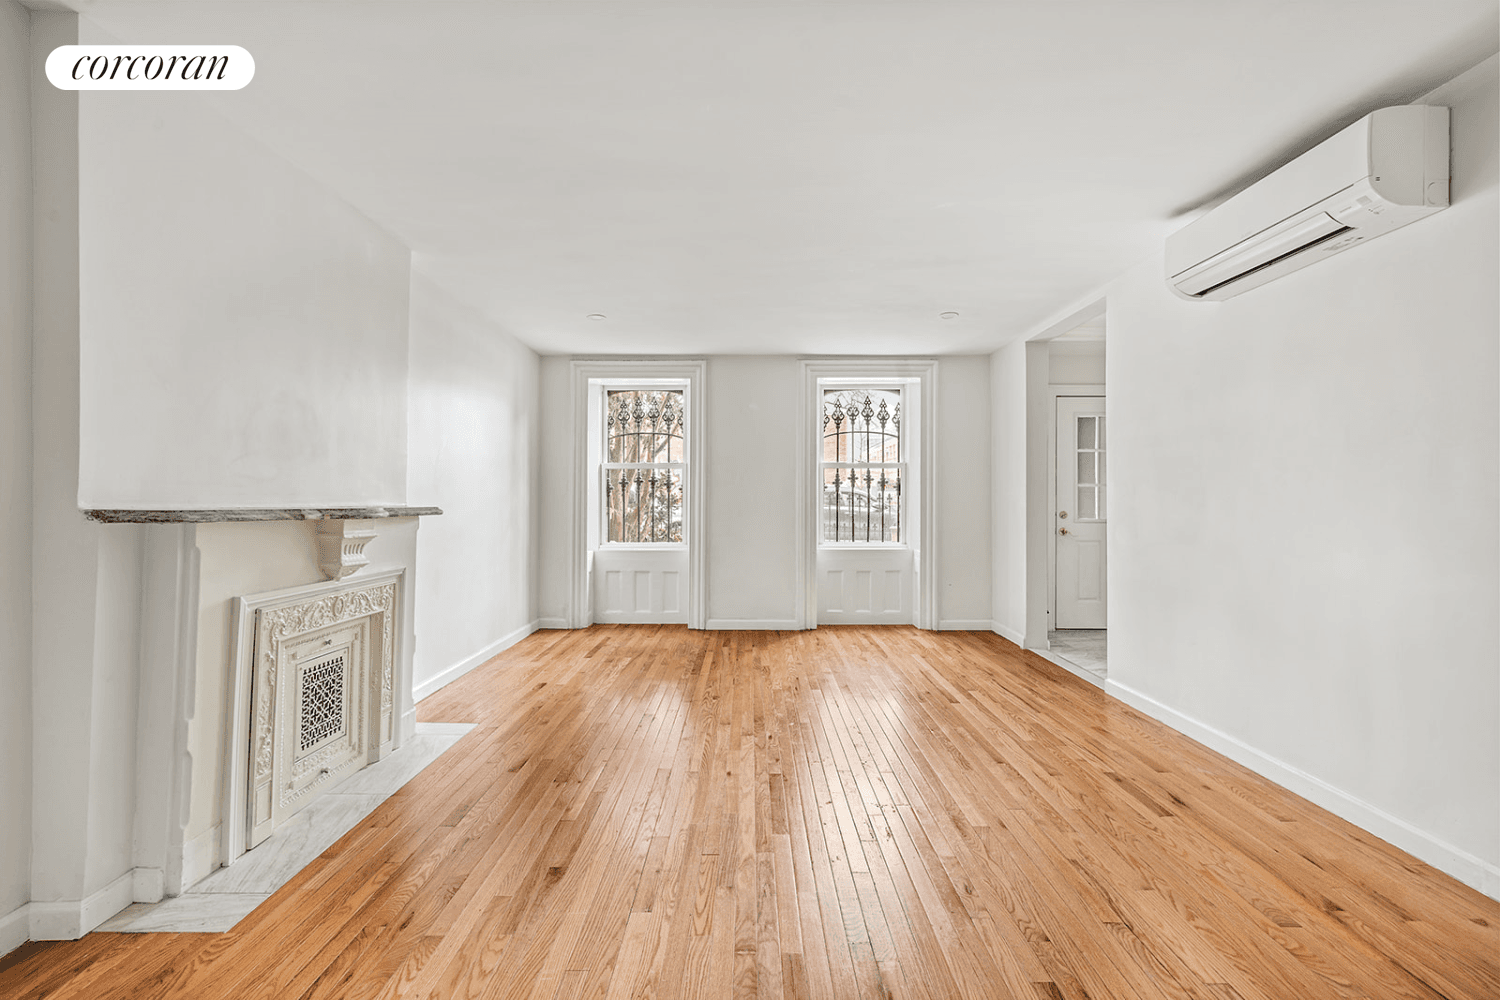 187 6th Ave, GardenAVAILABLE NOWStep into this beautiful recently renovated garden apartment and feel right at home in prime Park Slope.